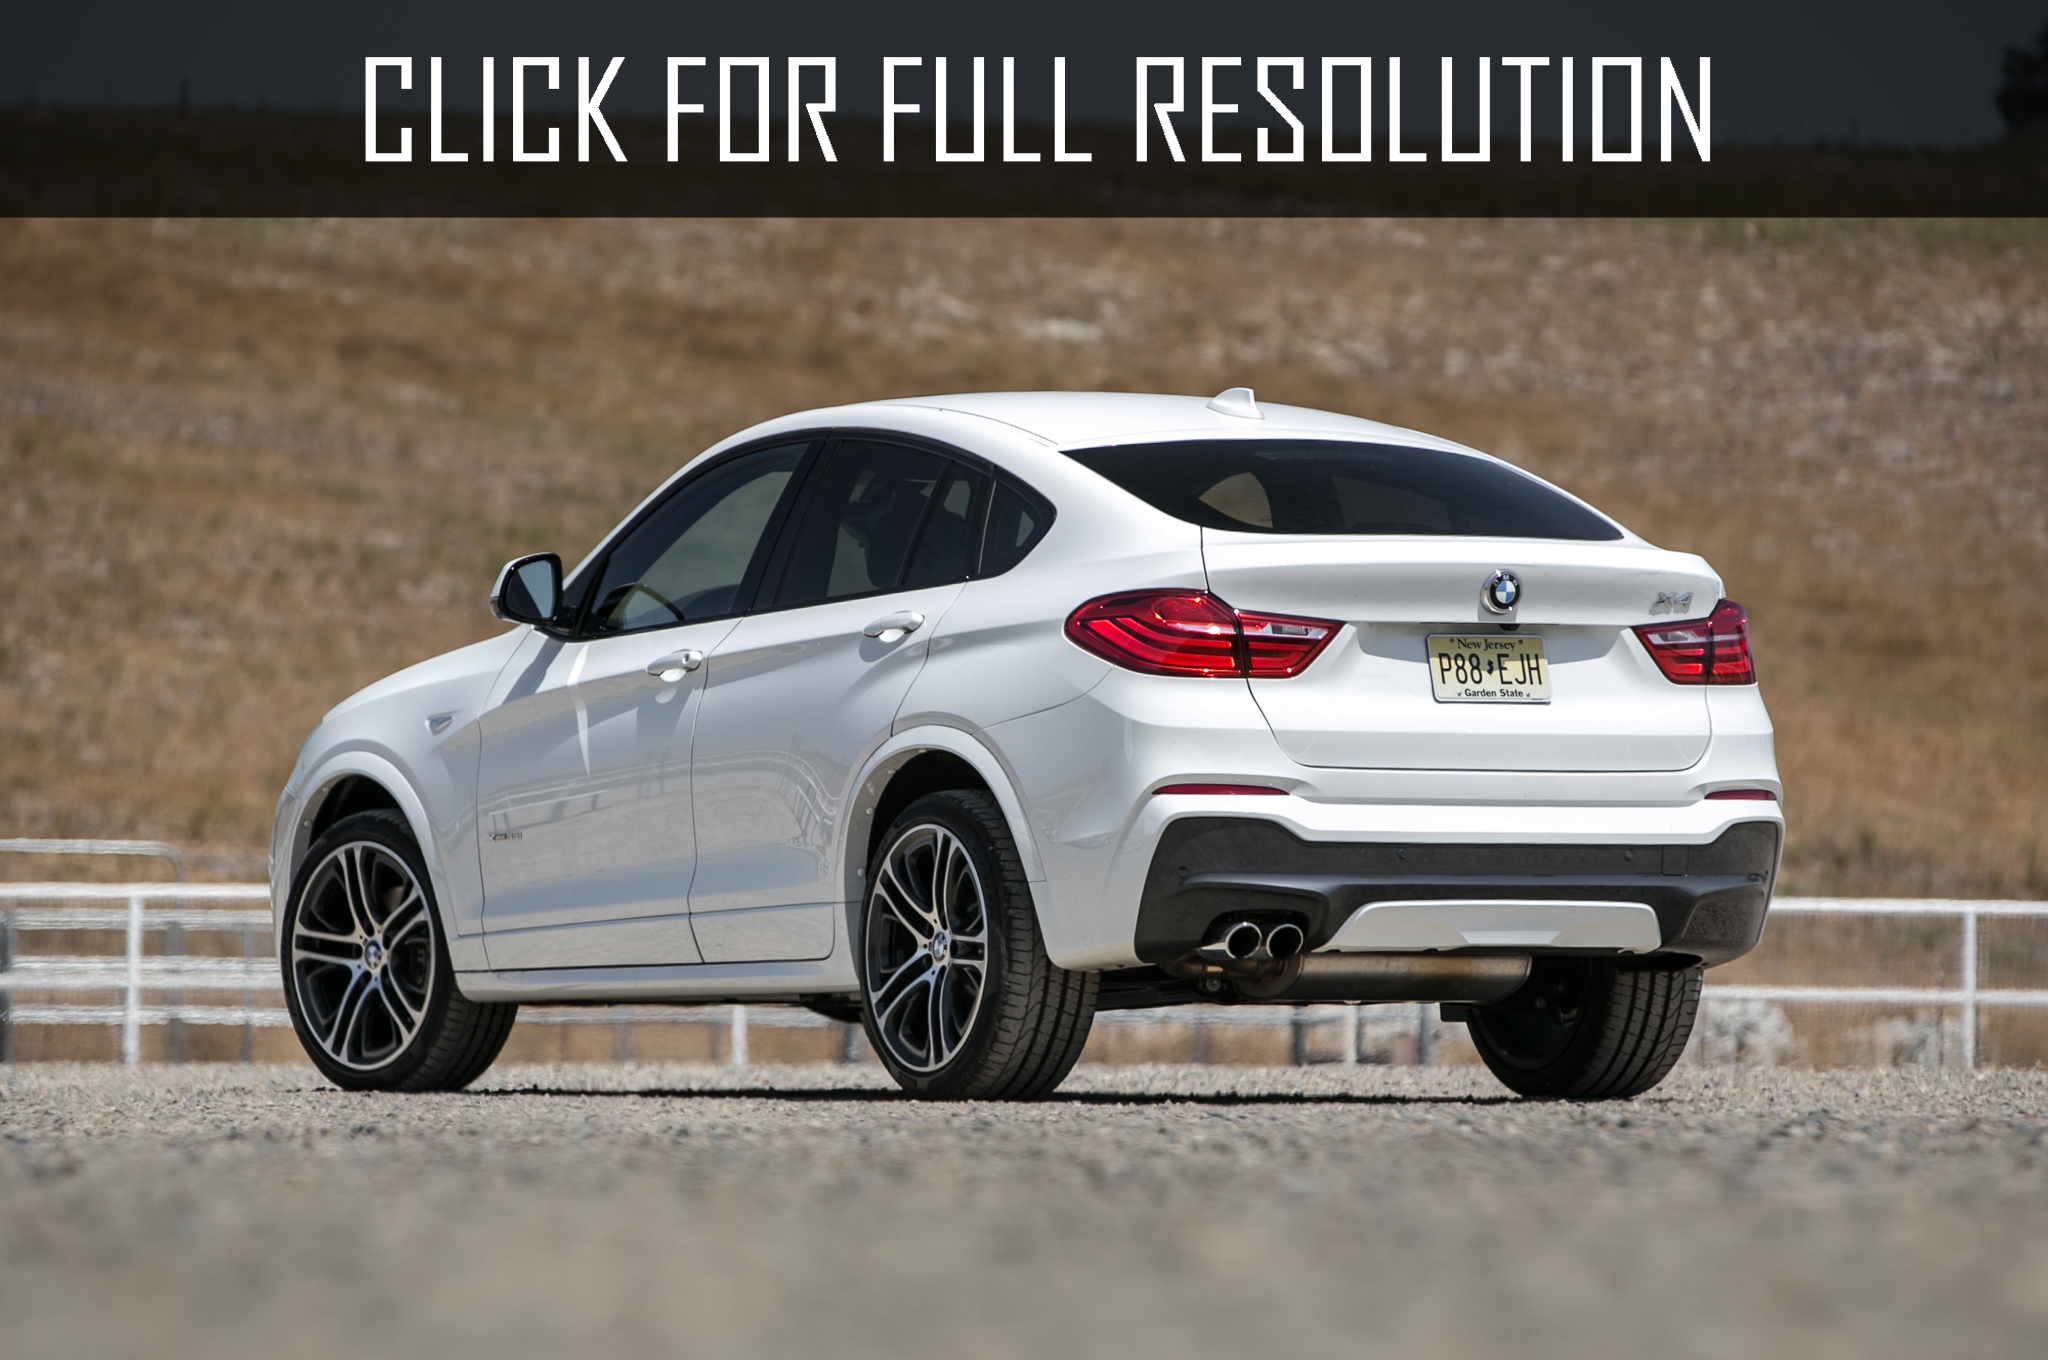 2015 Bmw X4 M best image gallery #2/15 - share and download